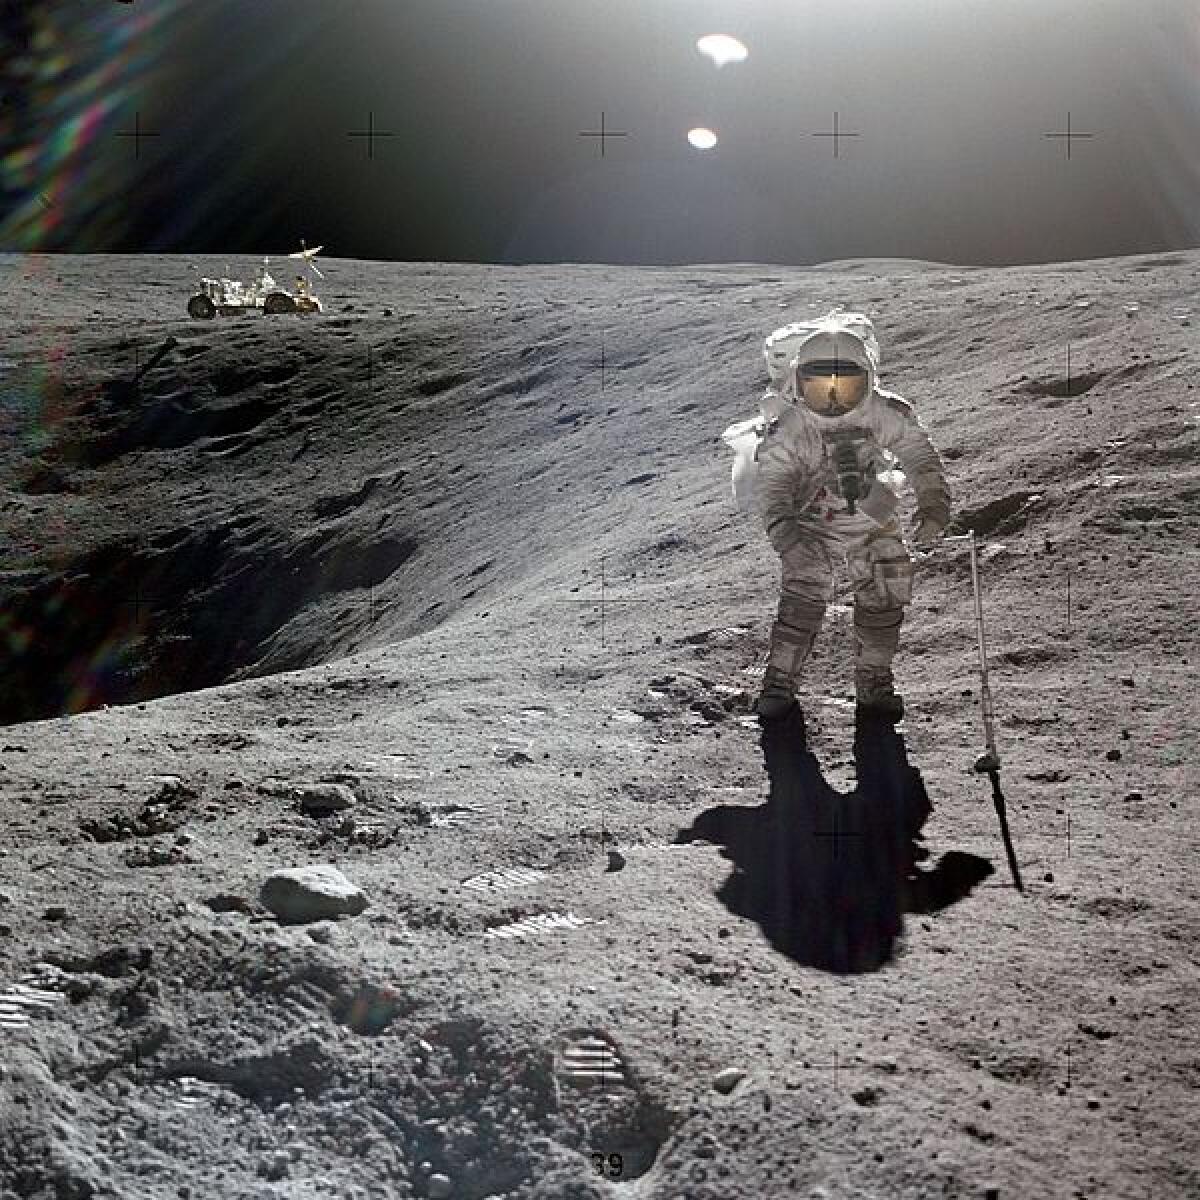 An astronaut walks on the moon with a lunar rover in the background.